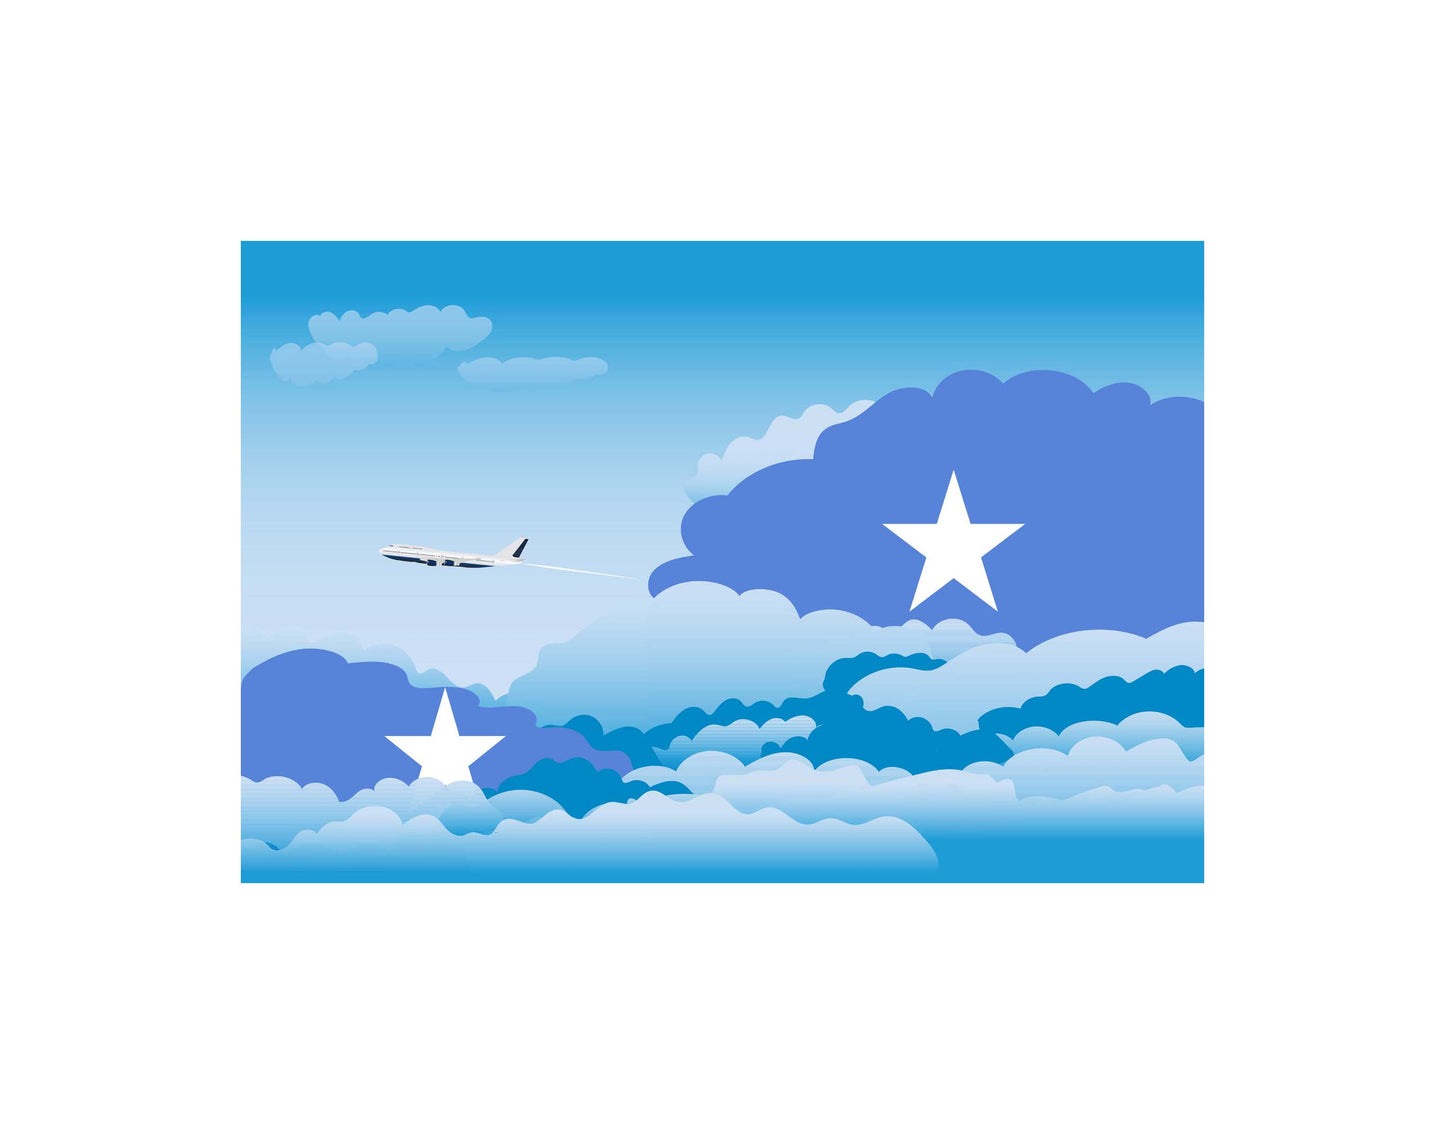 Somalia Flag Day Clouds Aeroplane Airport Flying Vector Illustration